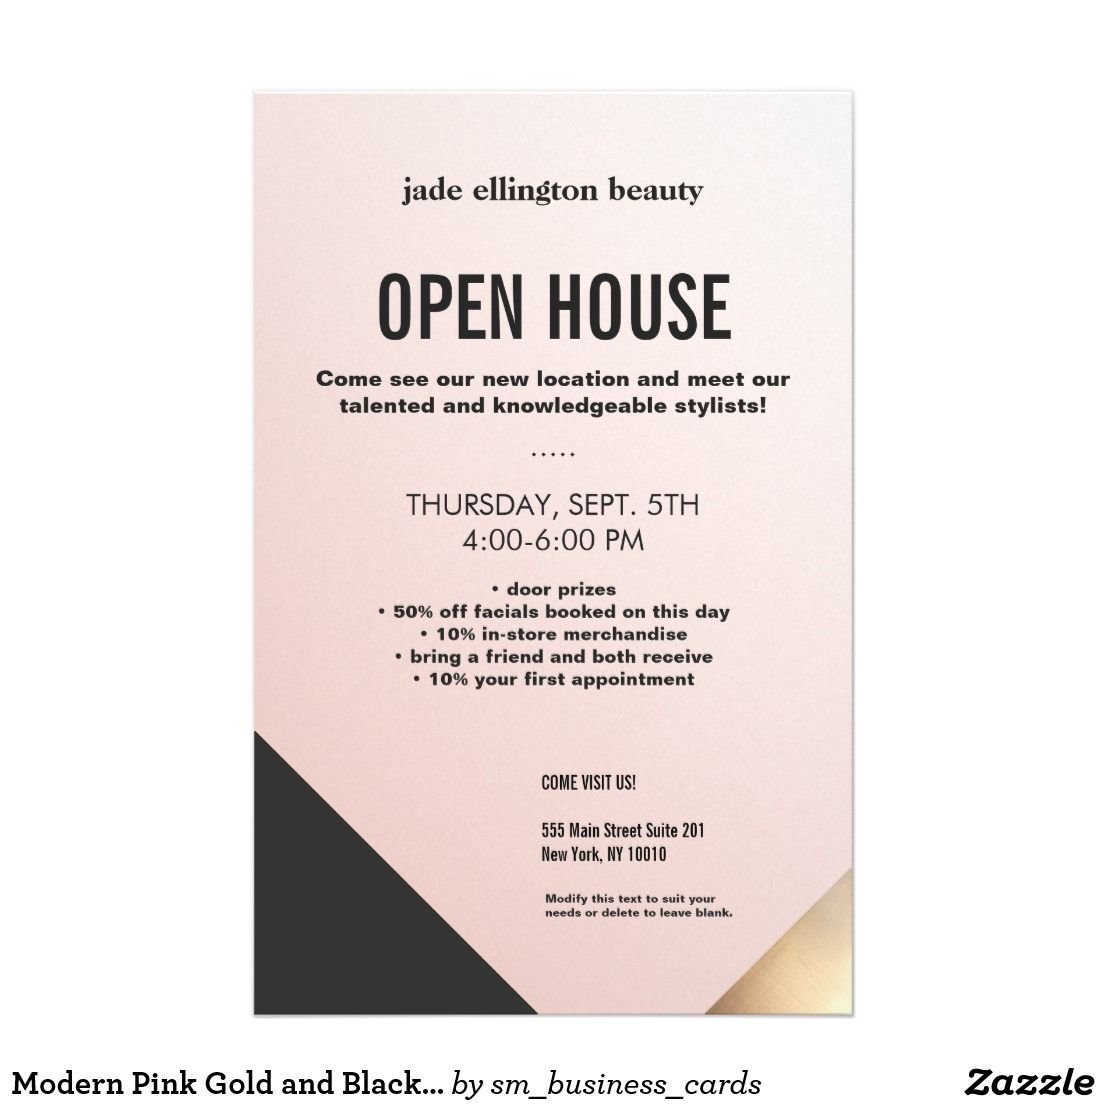 Modern Pink Gold and Black Colorblock Beauty Salon Flyer | Zazzle.com - Modern Pink Gold and Black Colorblock Beauty Salon Flyer | Zazzle.com -   16 beauty Design flyer ideas